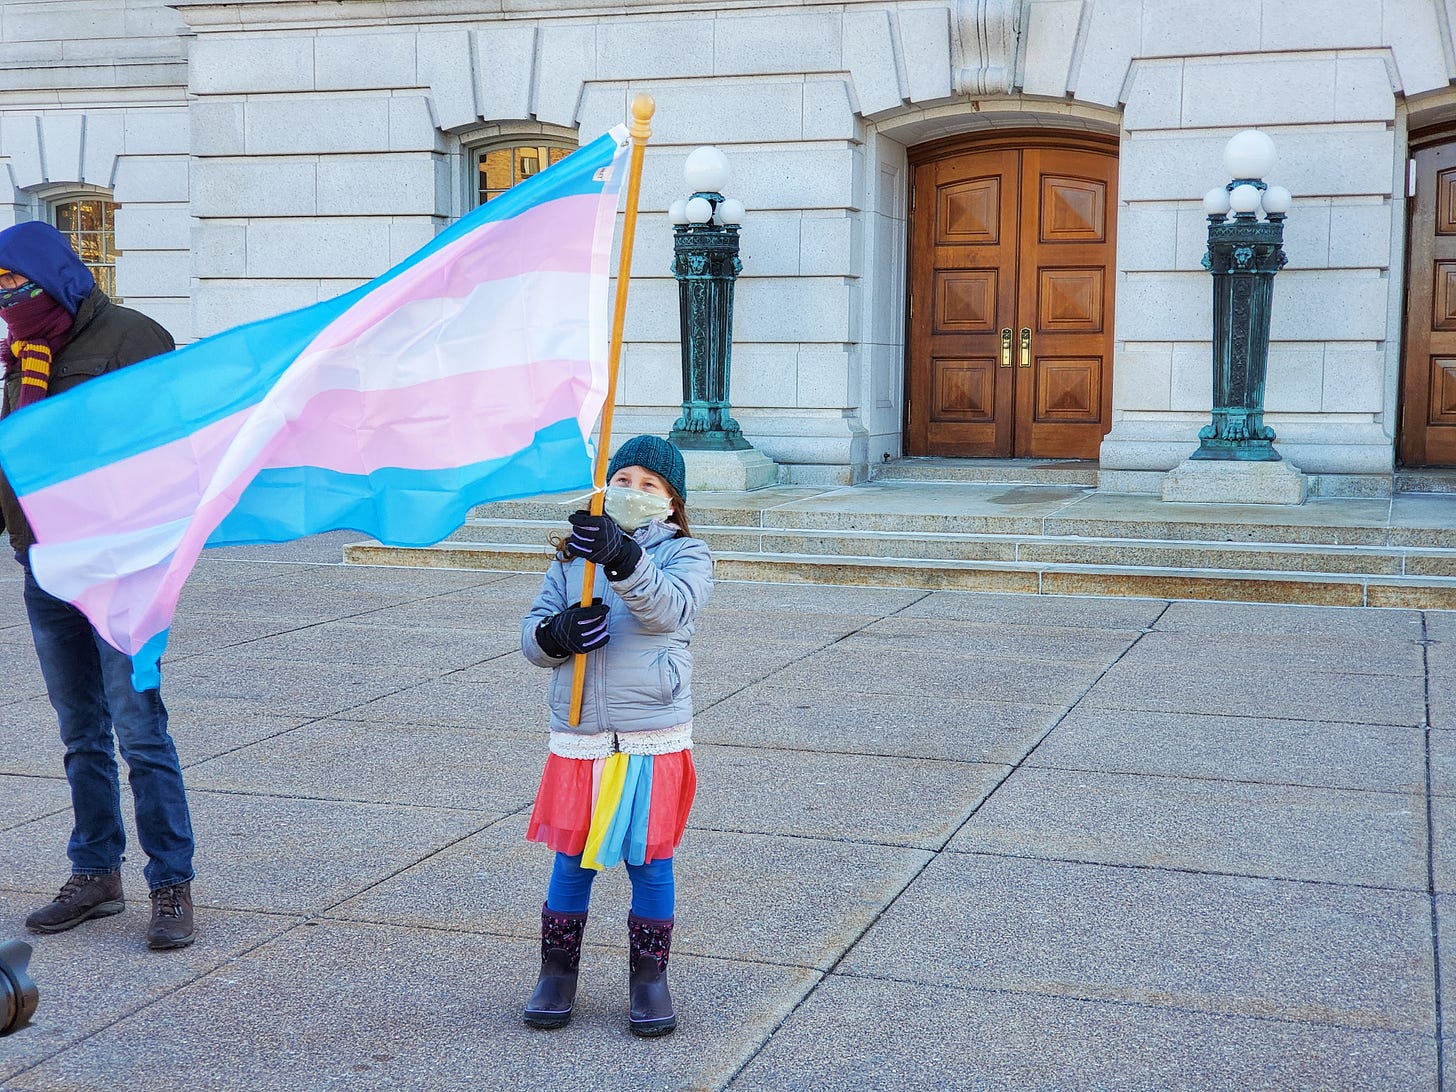 A young child waves a large transgender pride flag. She's wearing a knit cap, face mask, winter coat, and bright rainbow skirt over leggings.